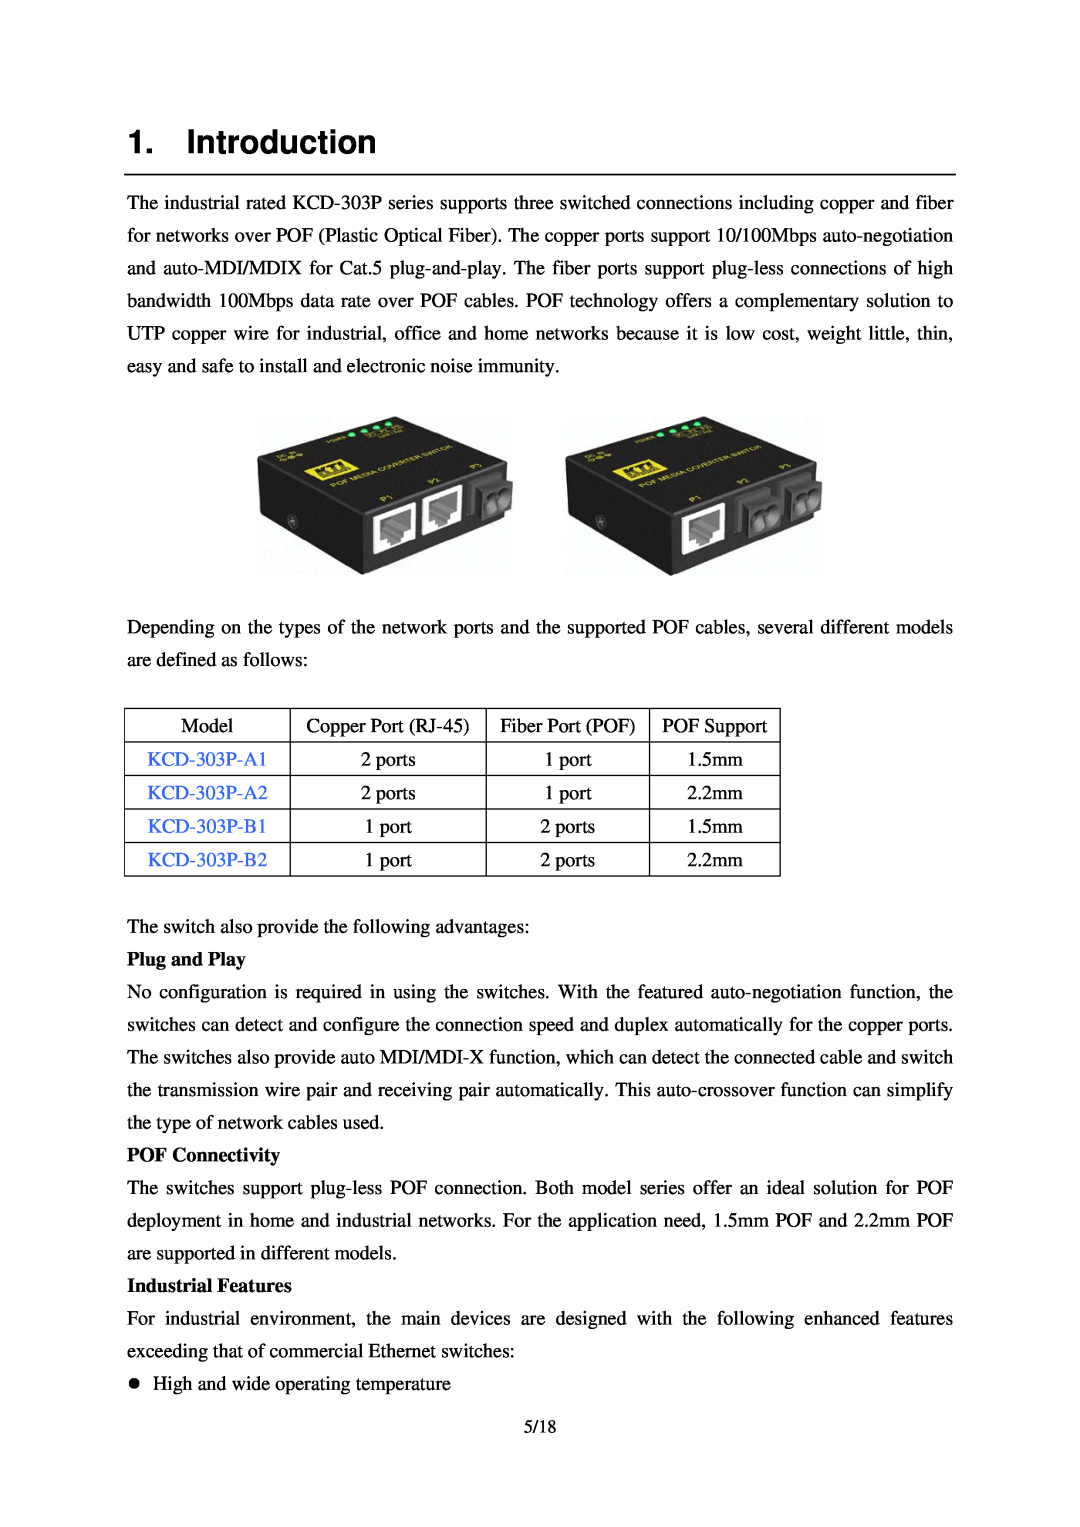 KTI Networks KCD-303P-A2, KCD-303P-A1, KCD-303P-B1 manual Introduction, Plug and Play, POF Connectivity, Industrial Features 